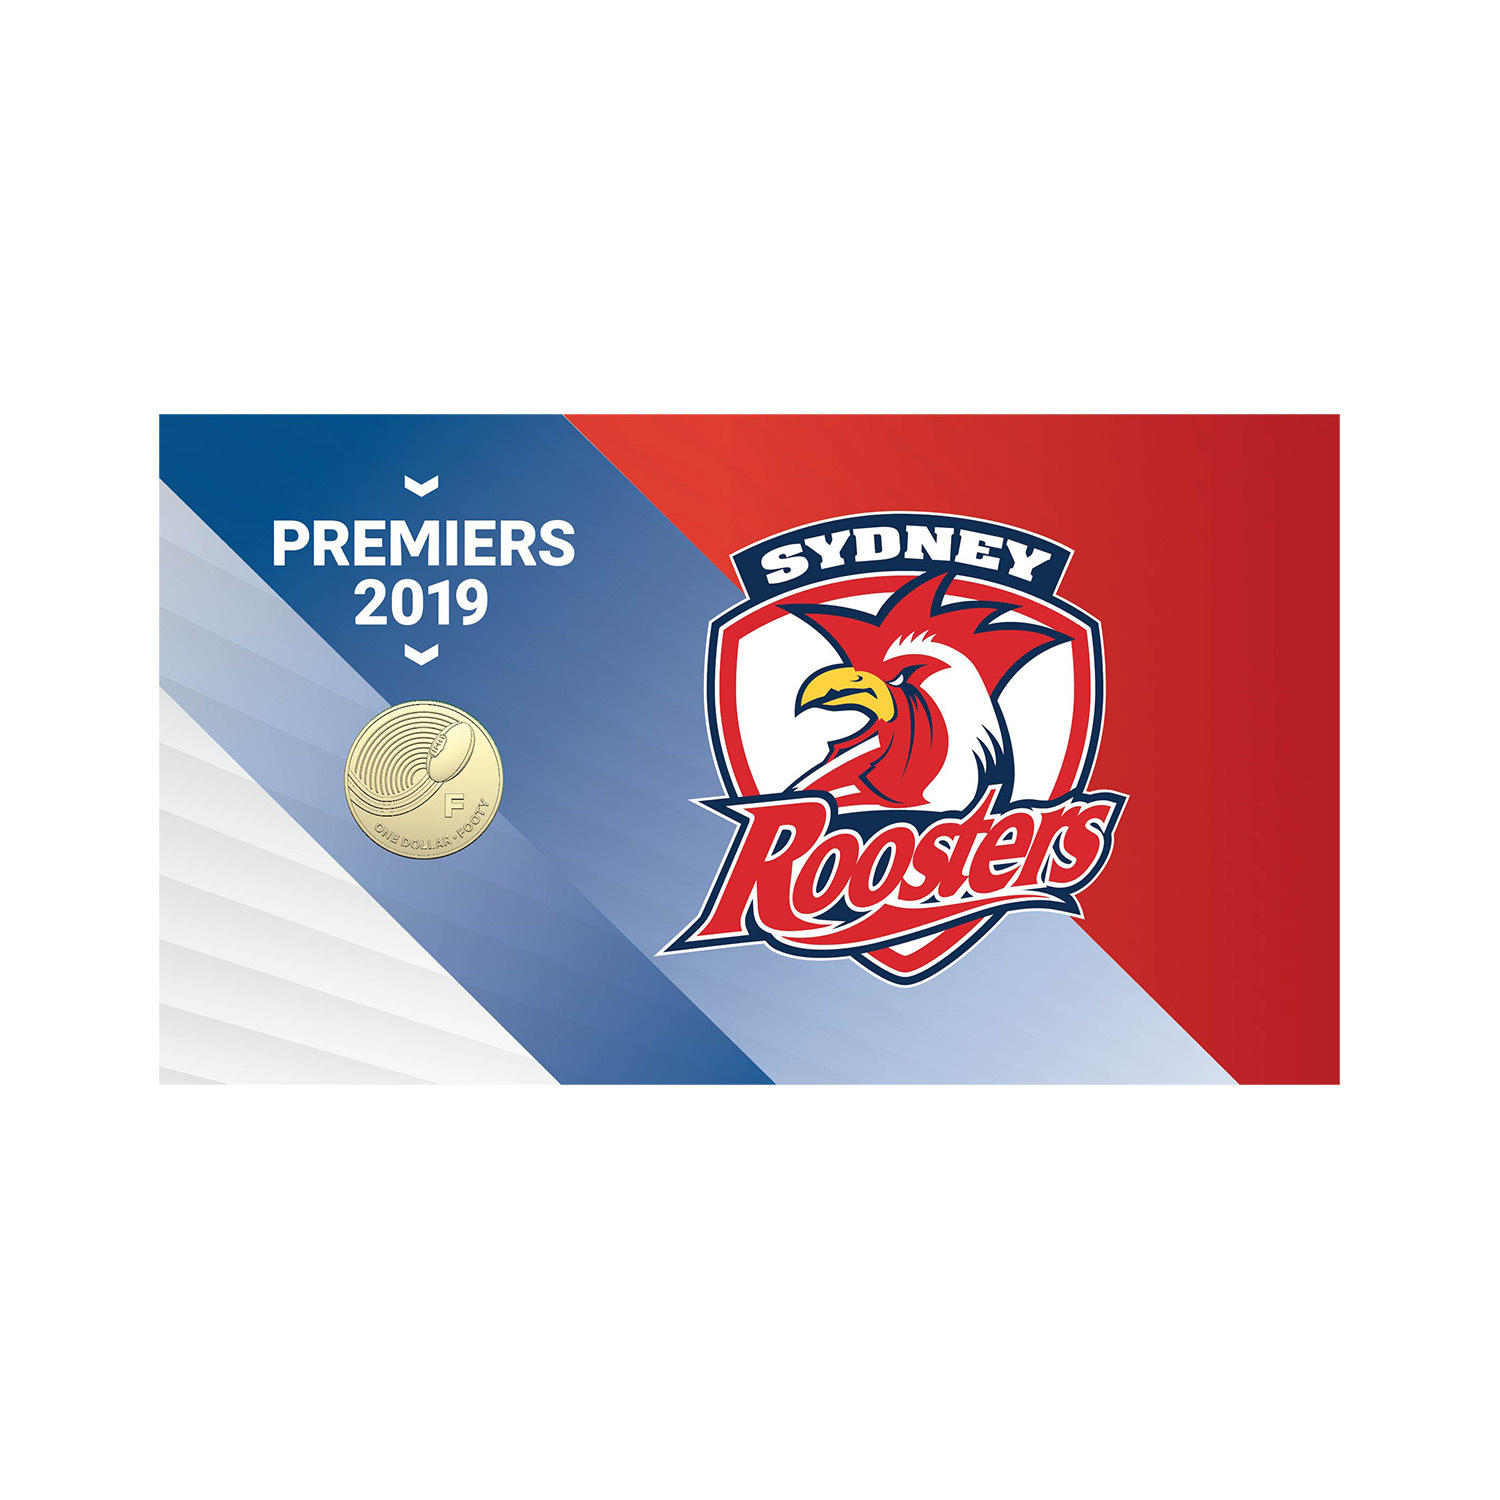 Details about   PNC Australia 2019 Sydney Roosters NRL Premiers RAM $1 Coin Limited Edition 2019 